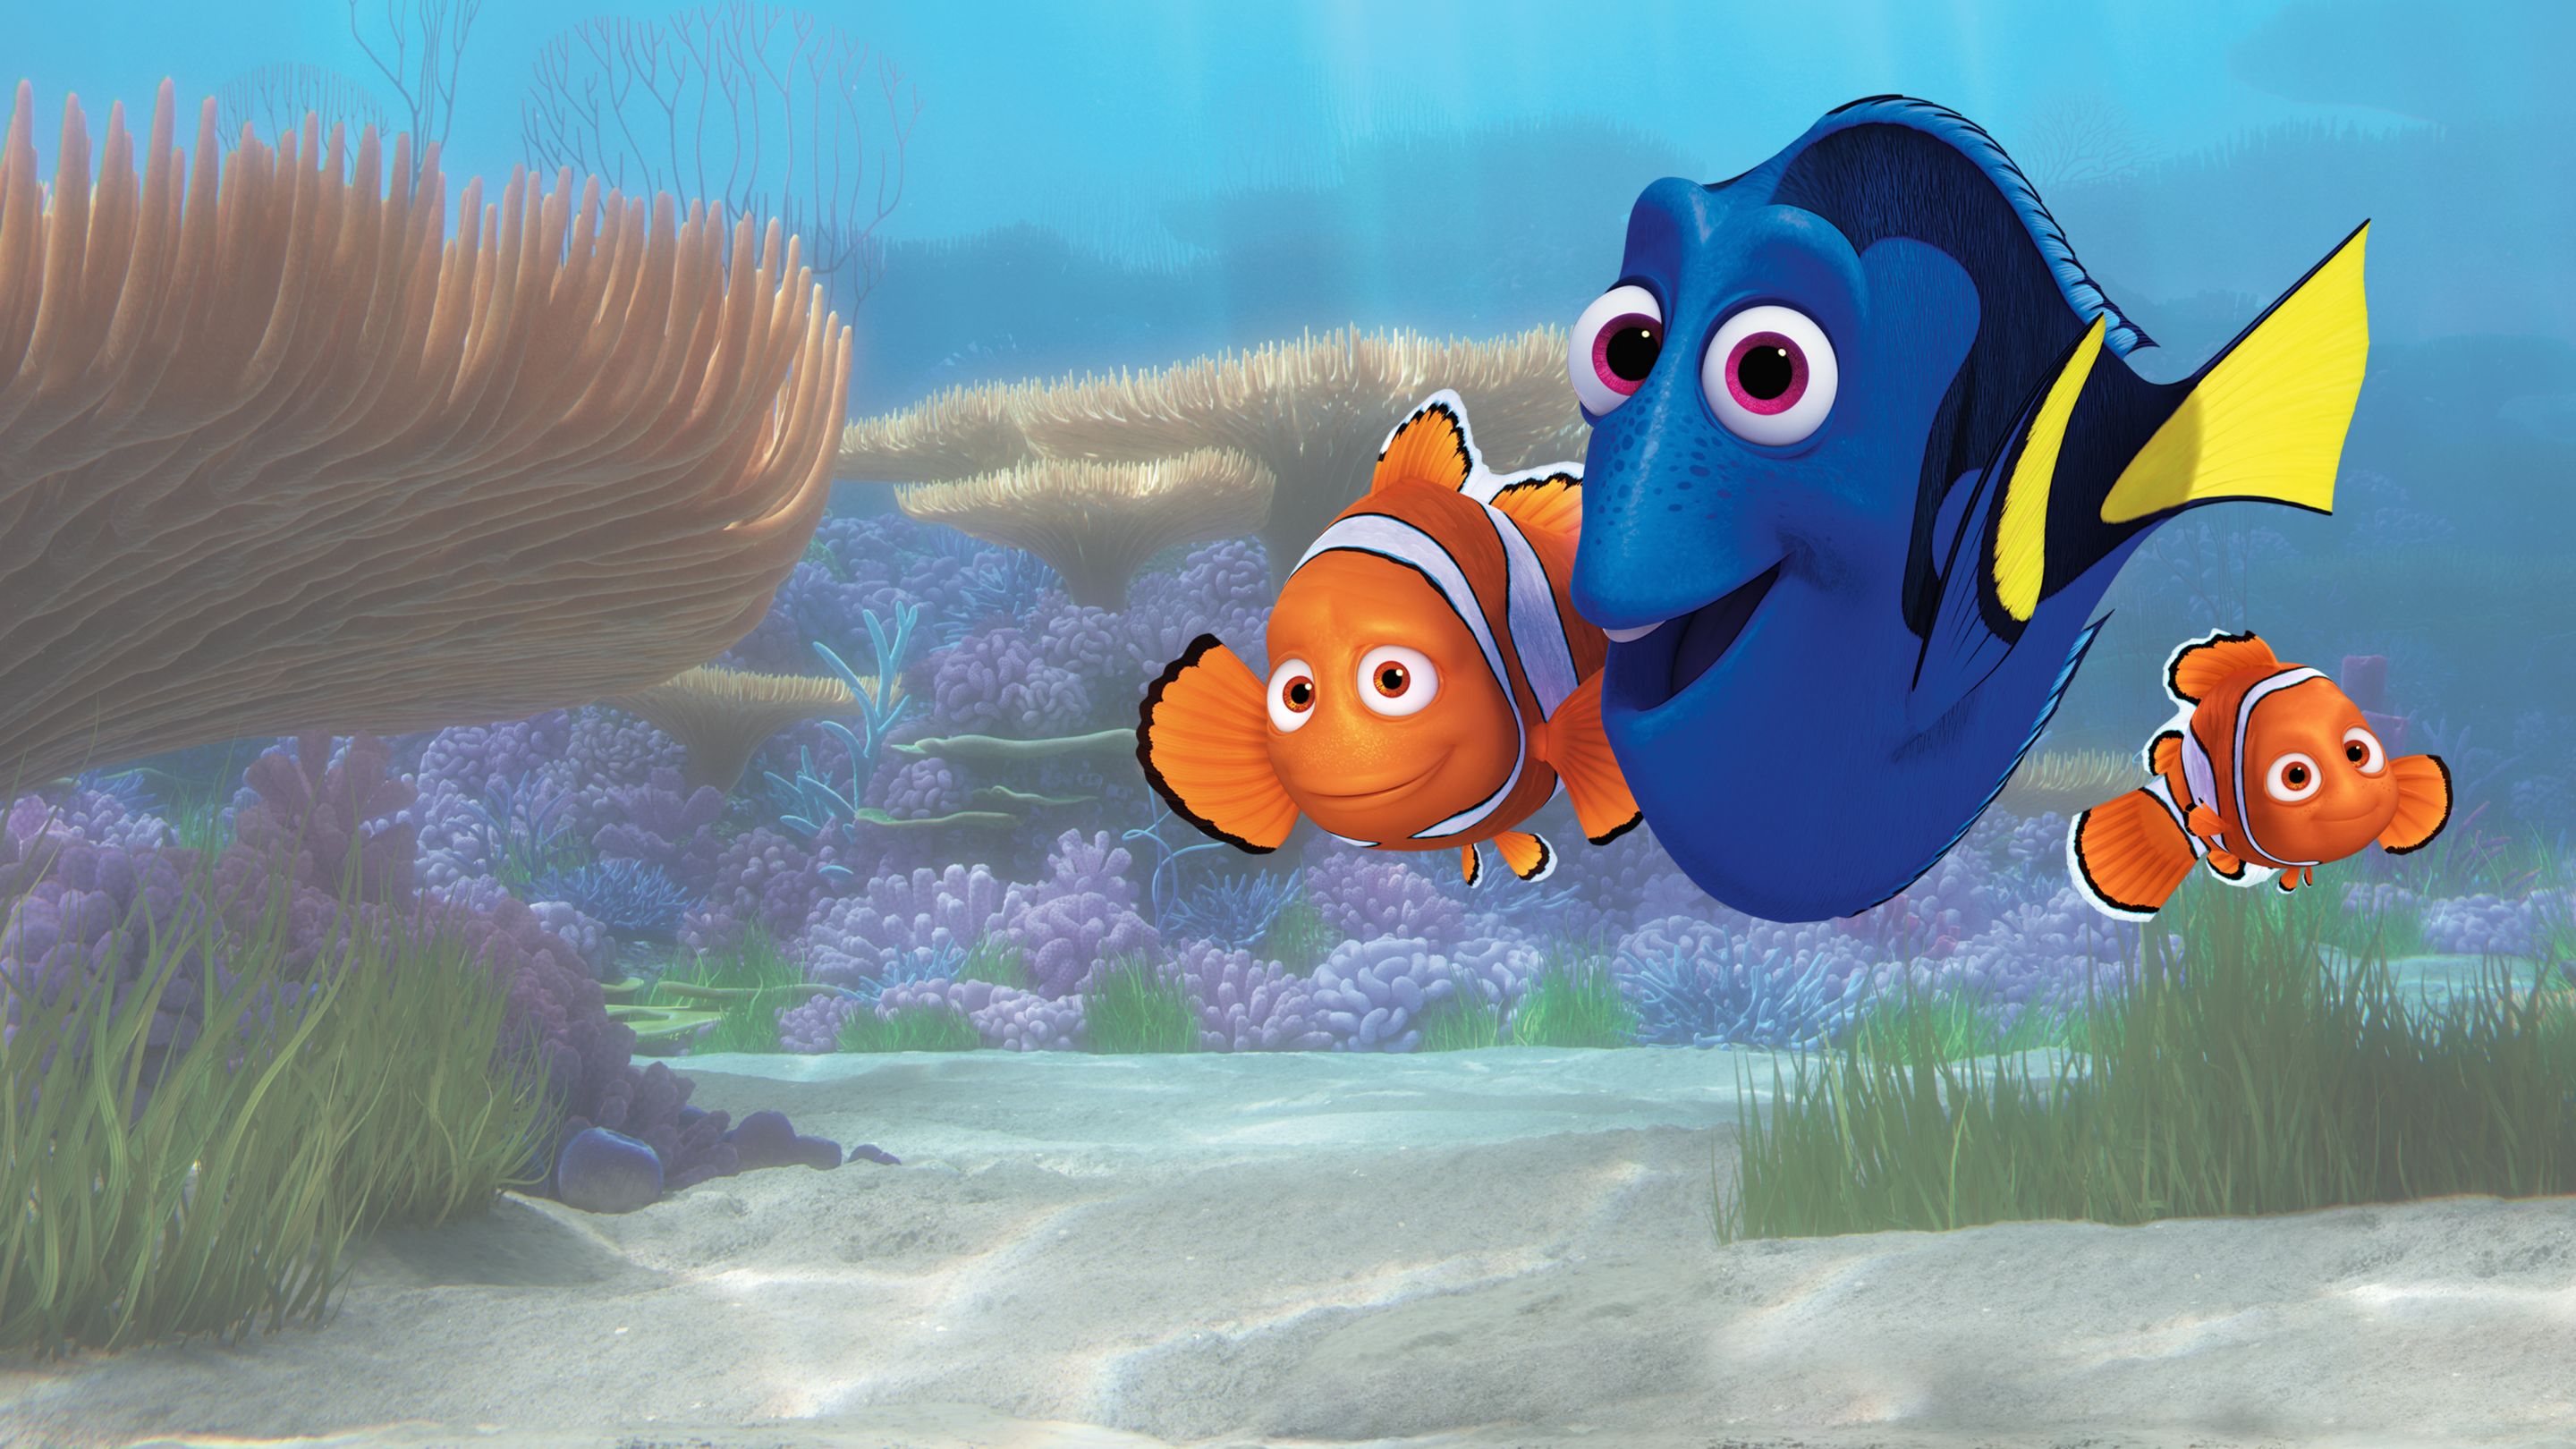 watch finding dory online streaming